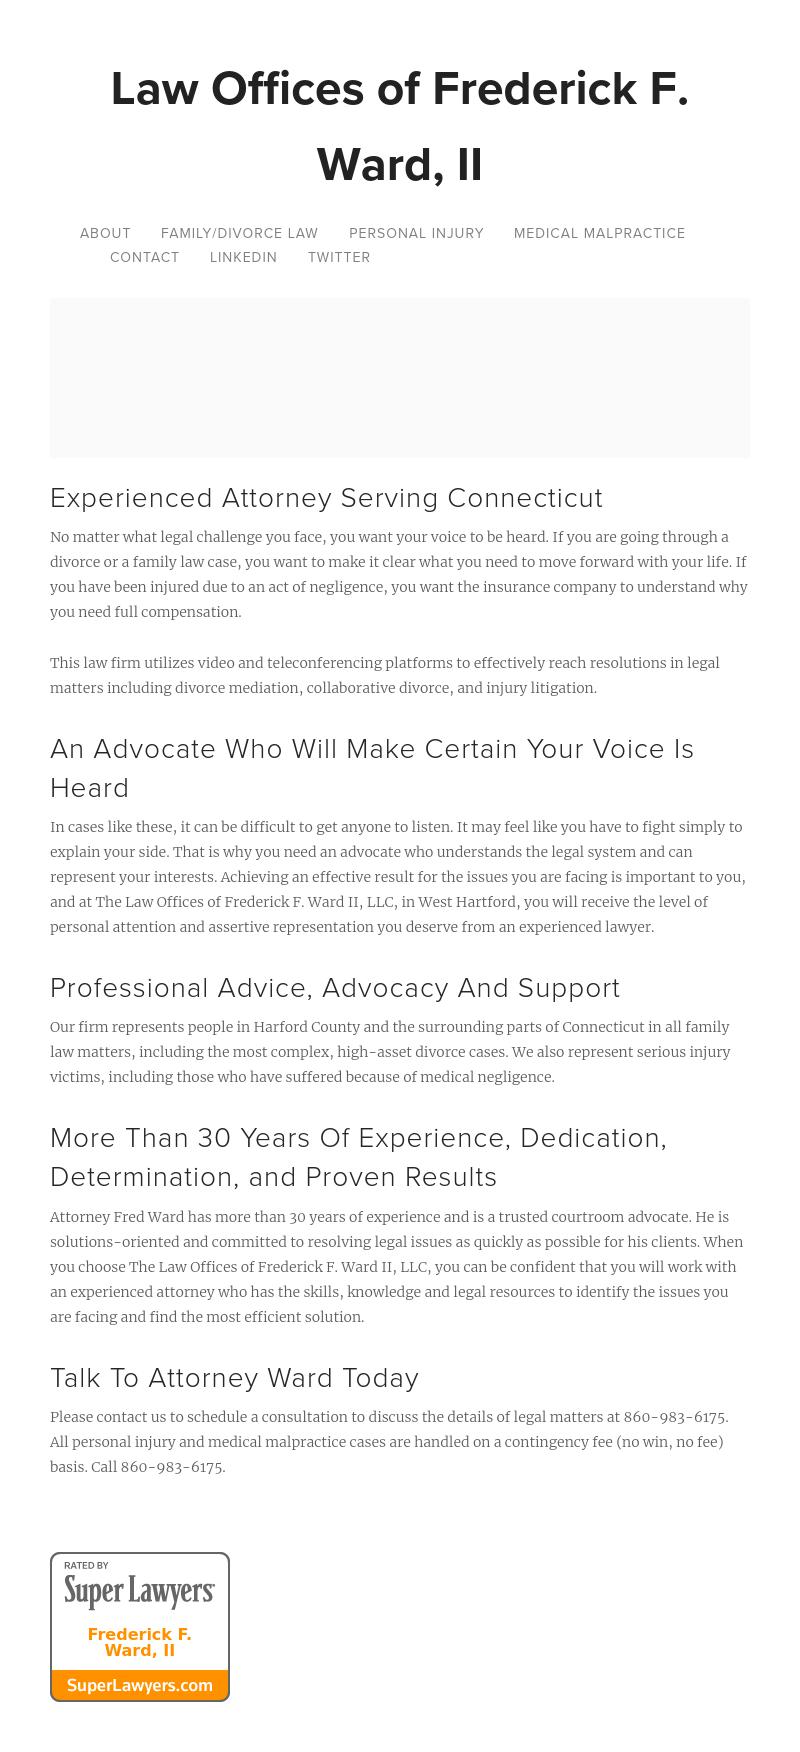 The Law Offices of Frederick F. Ward II, LLC - West Hartford CT Lawyers